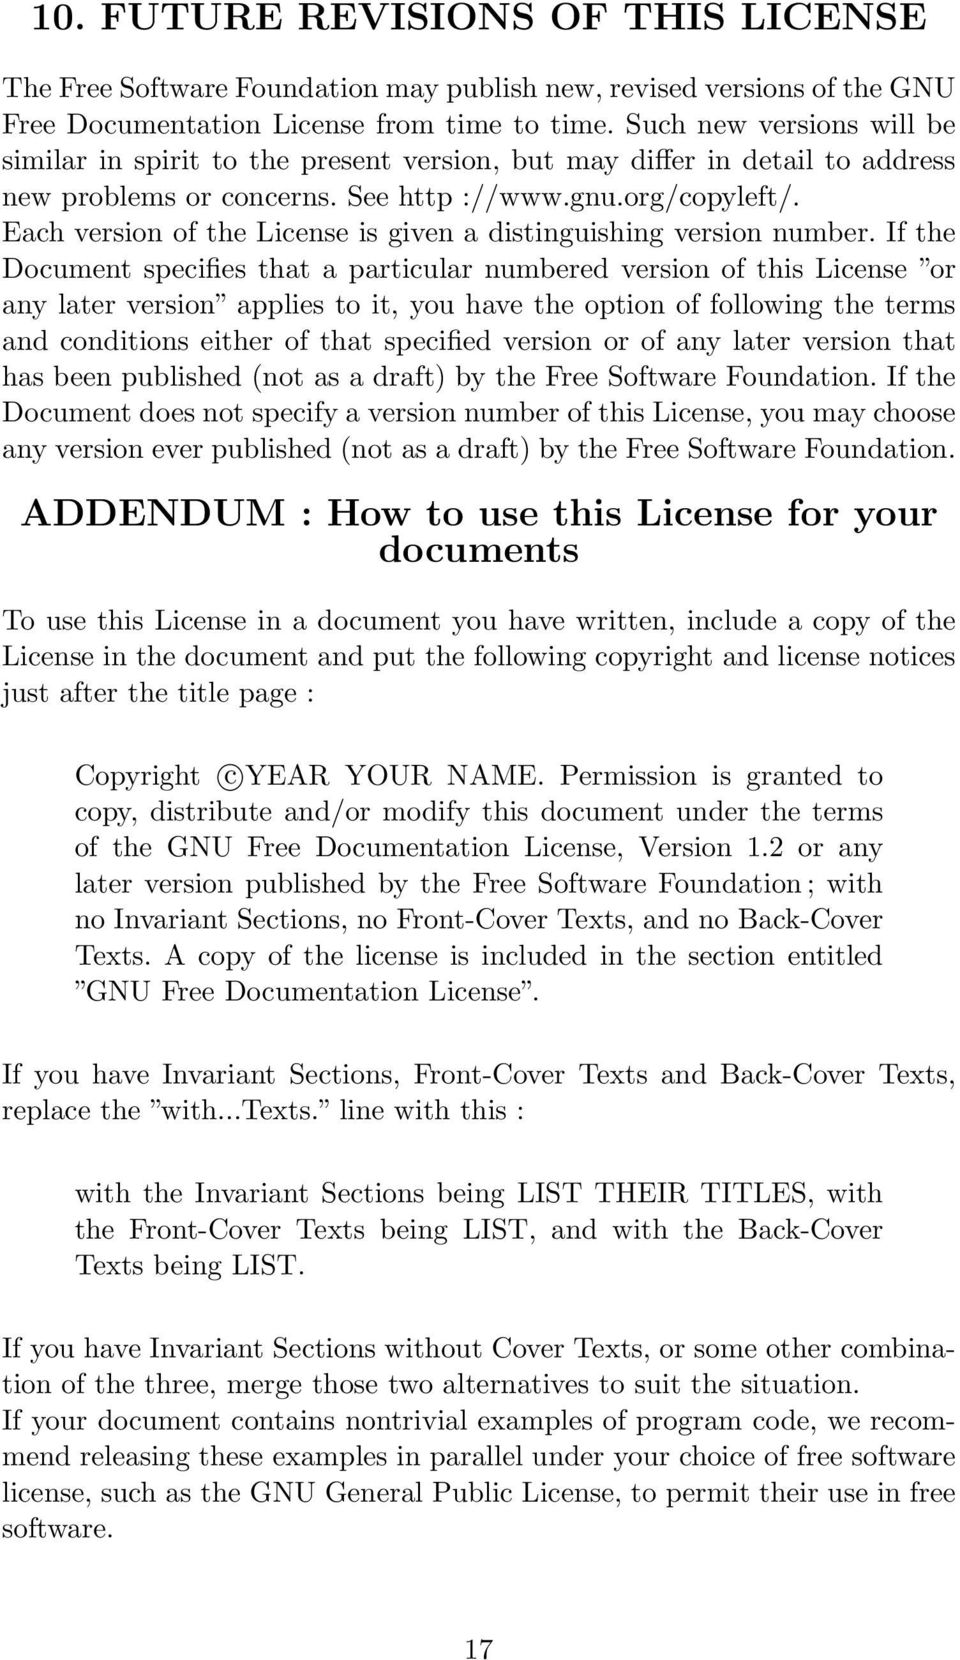 Each version of the License is given a distinguishing version number.